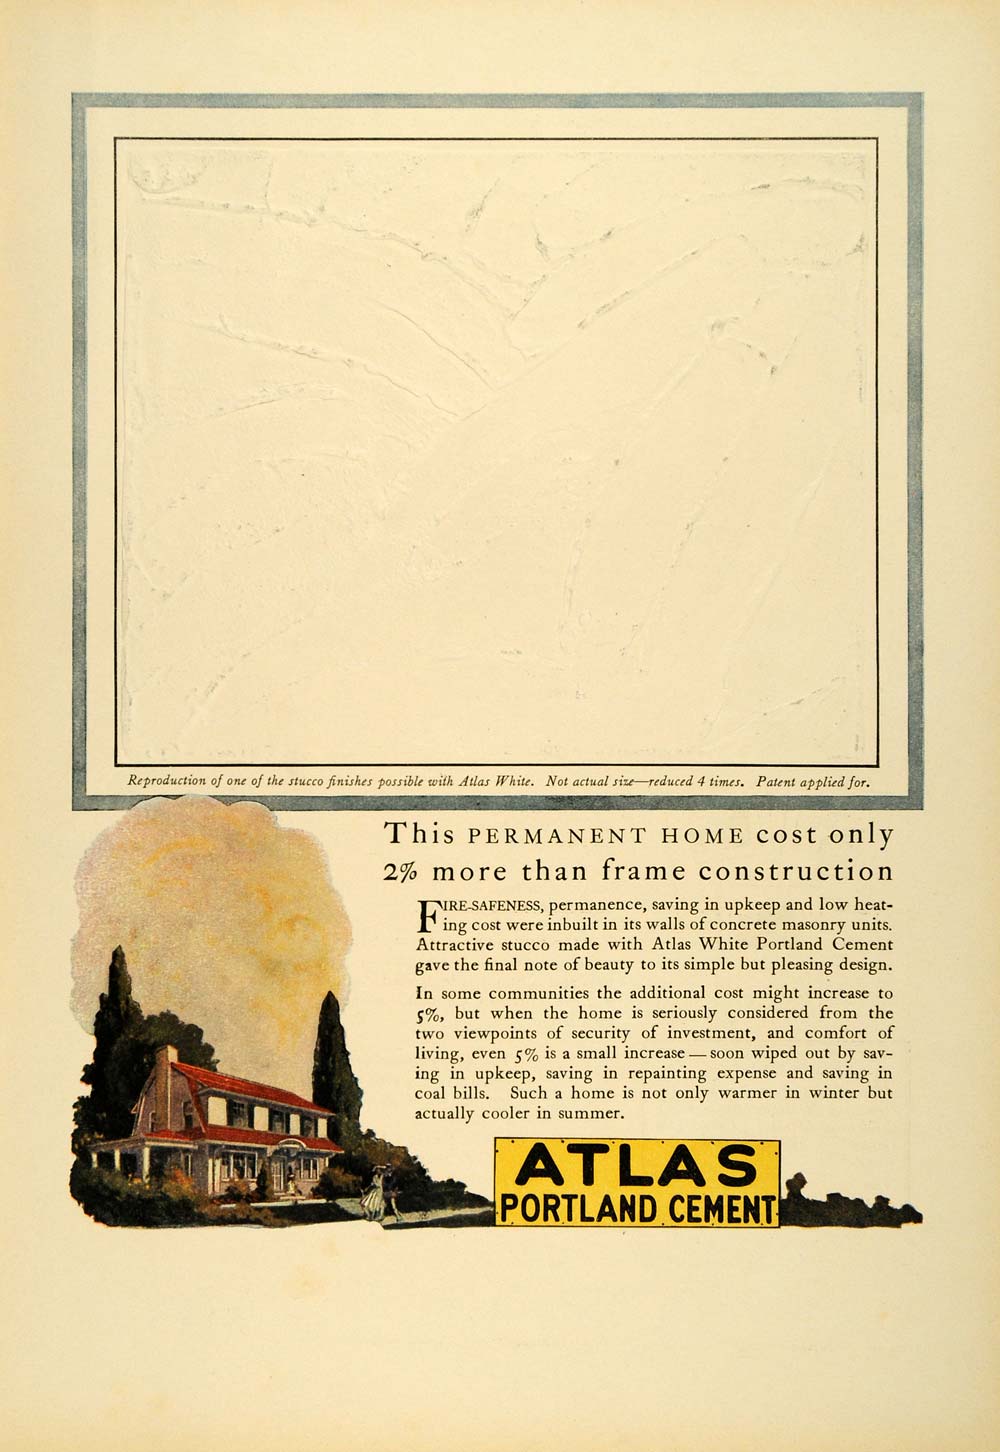 1923 Ad White Atlas Portland Cement Home Construction Building Materials NY COL3